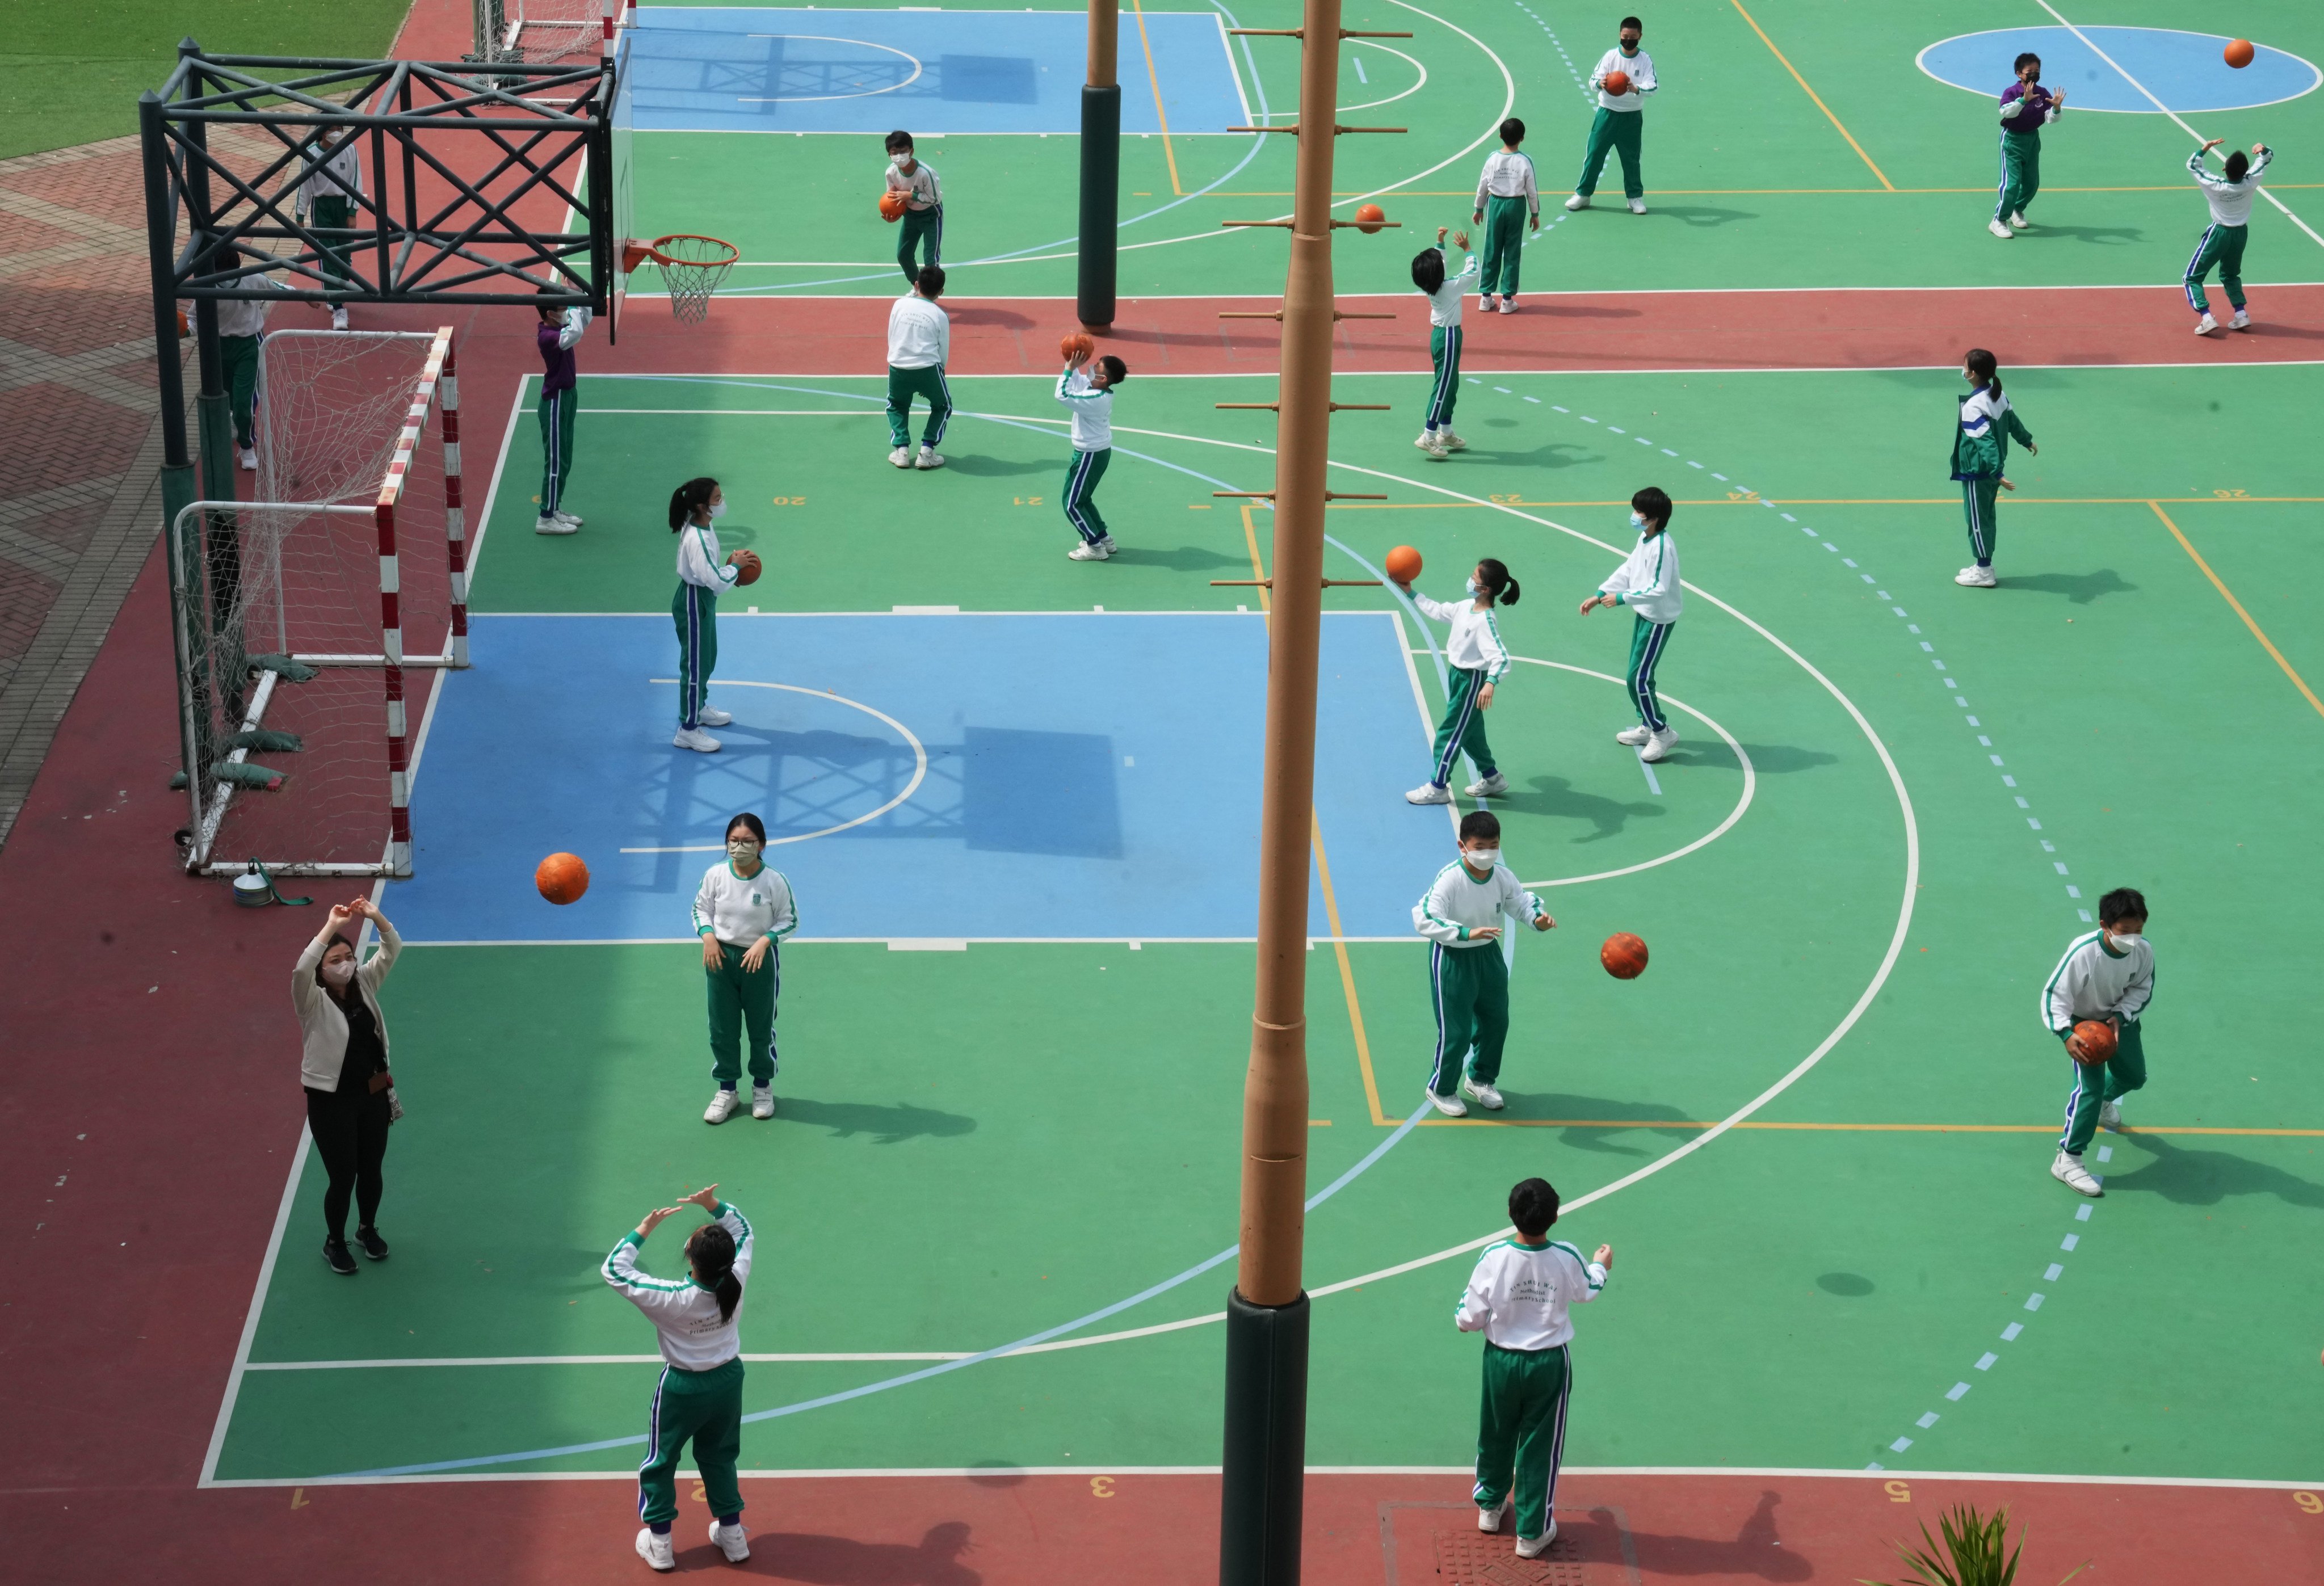 Schoolchildren play basketball at the height of the pandemic with masks on - but a survey has found many have kept wearing them because of worries about their looks. Photo: Sam Tsang